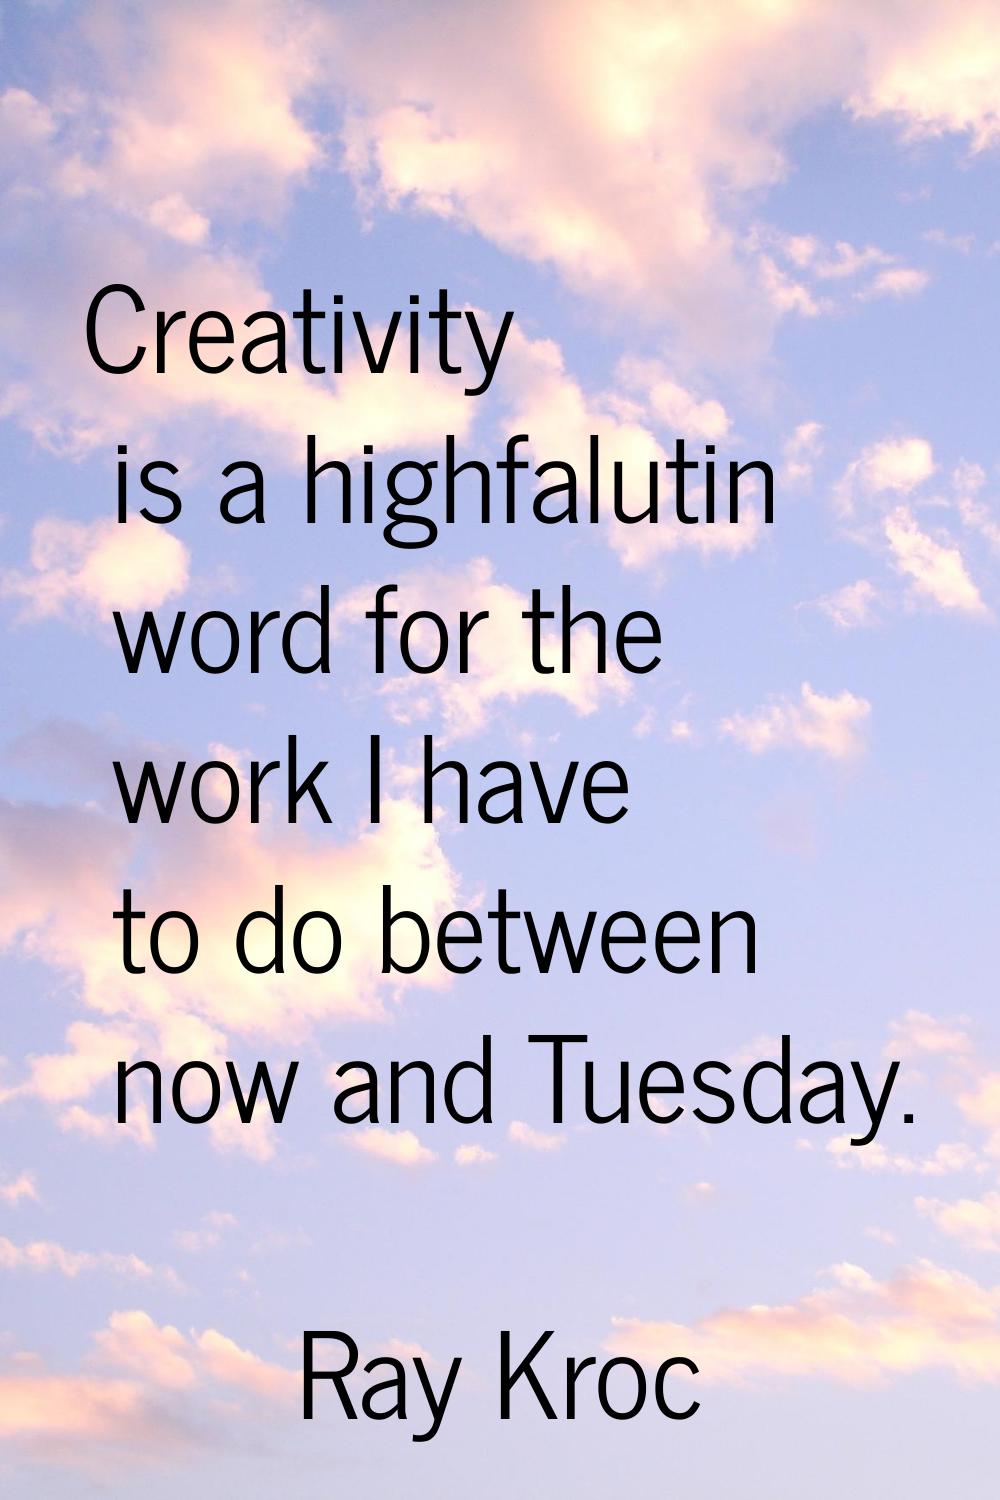 Creativity is a highfalutin word for the work I have to do between now and Tuesday.